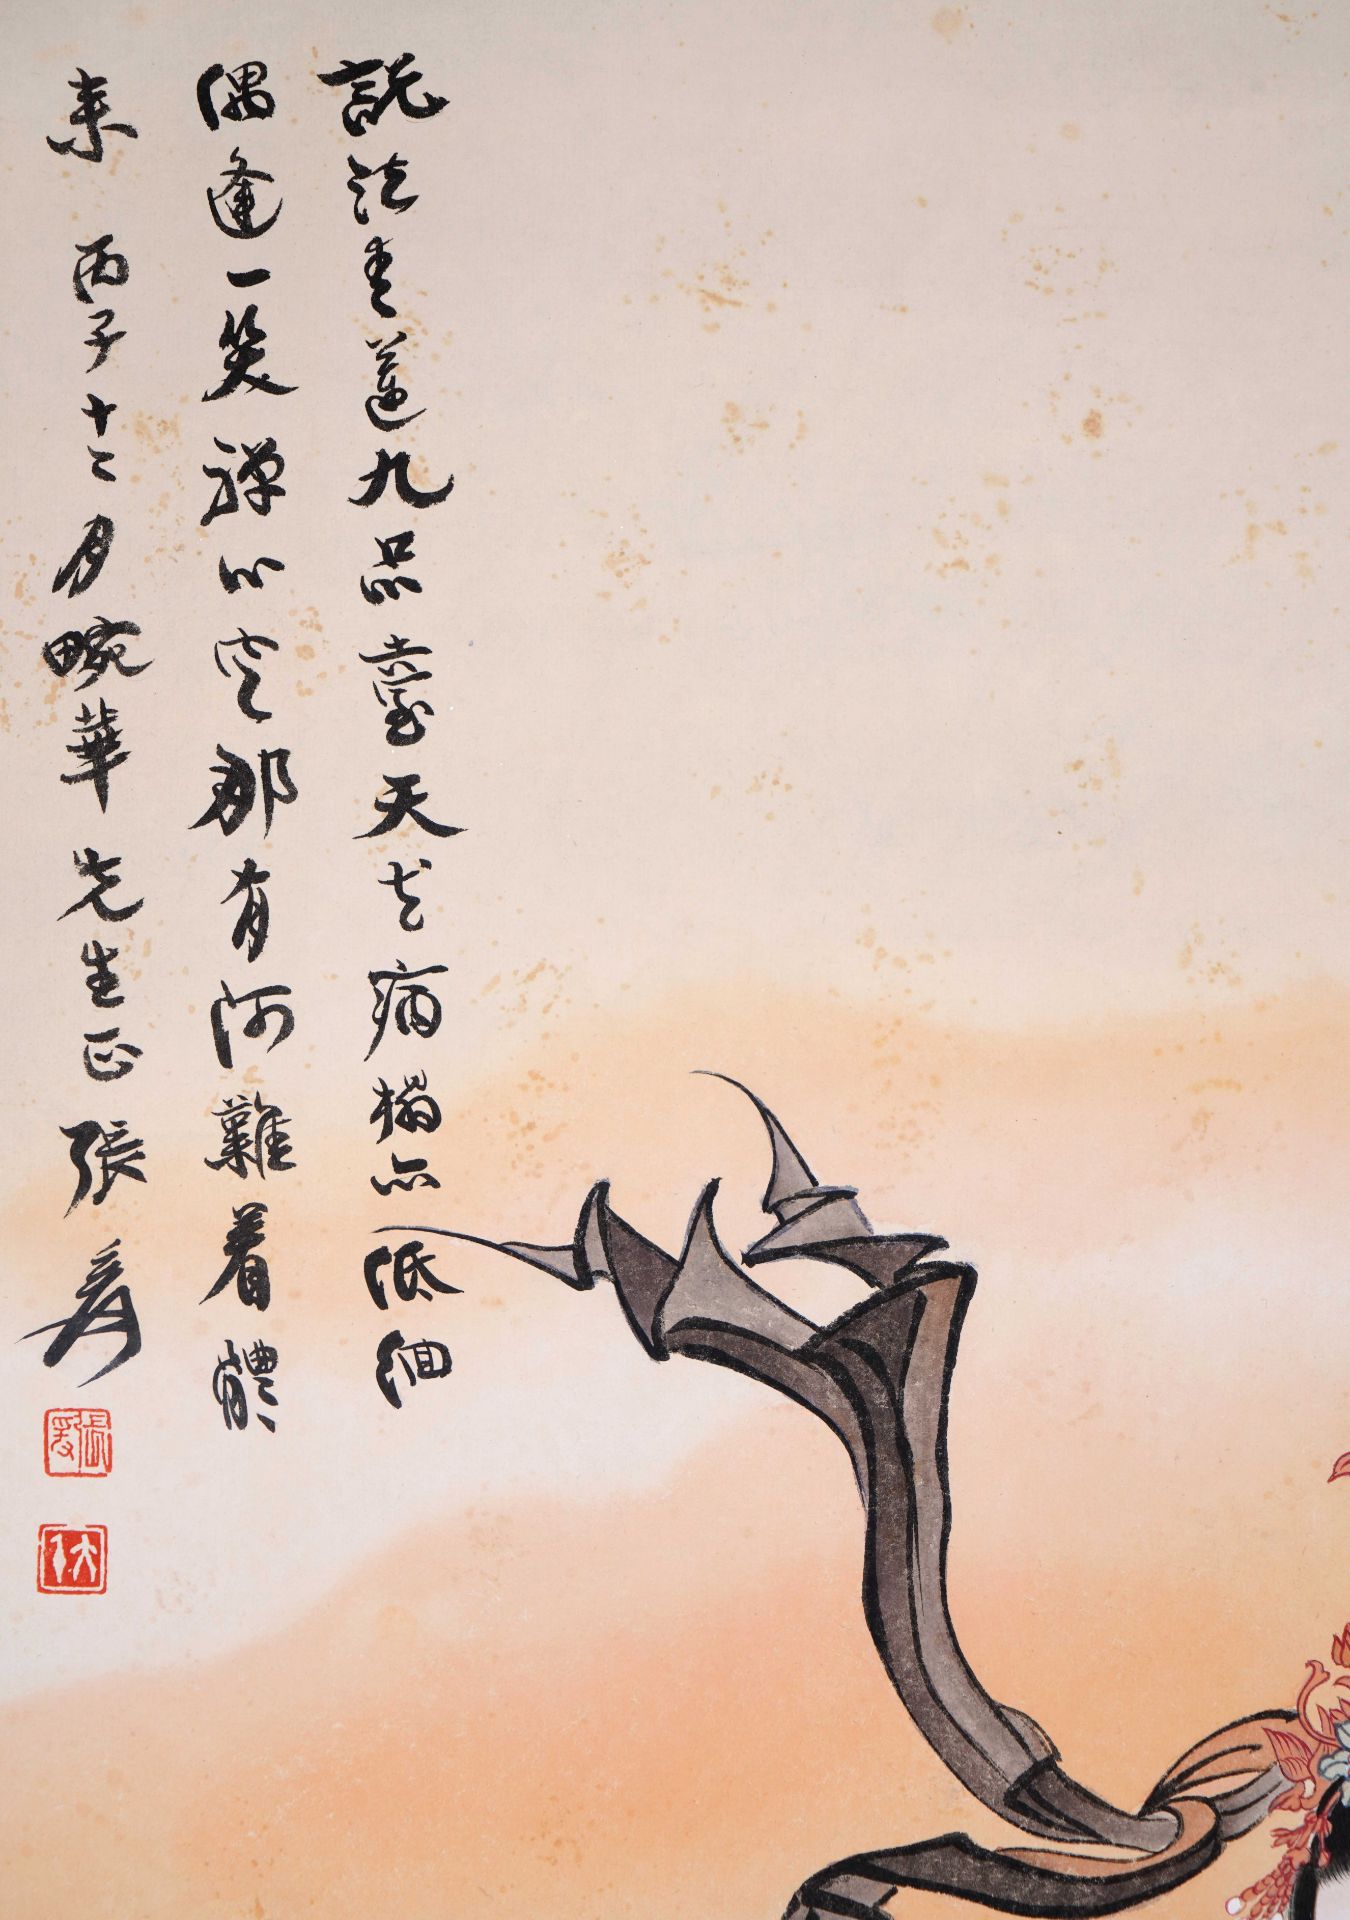 A Chinese Scroll Painting by Zhang Daqian - Image 3 of 9